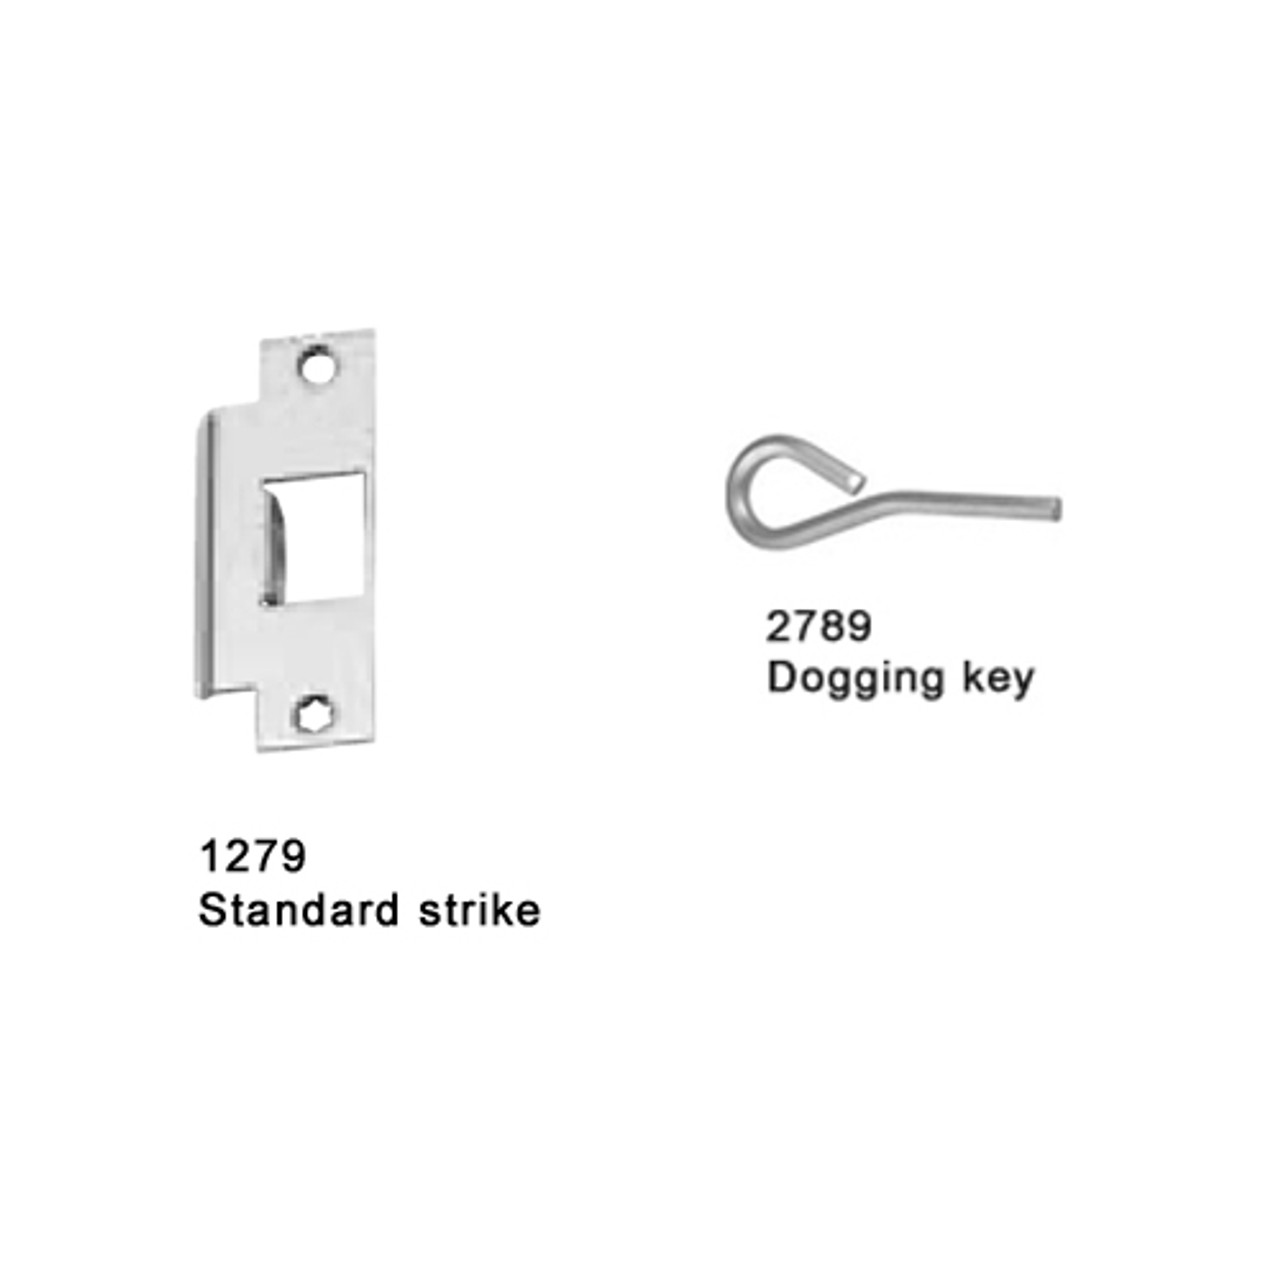 25-M-L-NL-DANE-US15-3-LHR Falcon 25 Series Mortise Lock Devices 510L-NL Dane Lever Trim with Night Latch in Satin Nickel